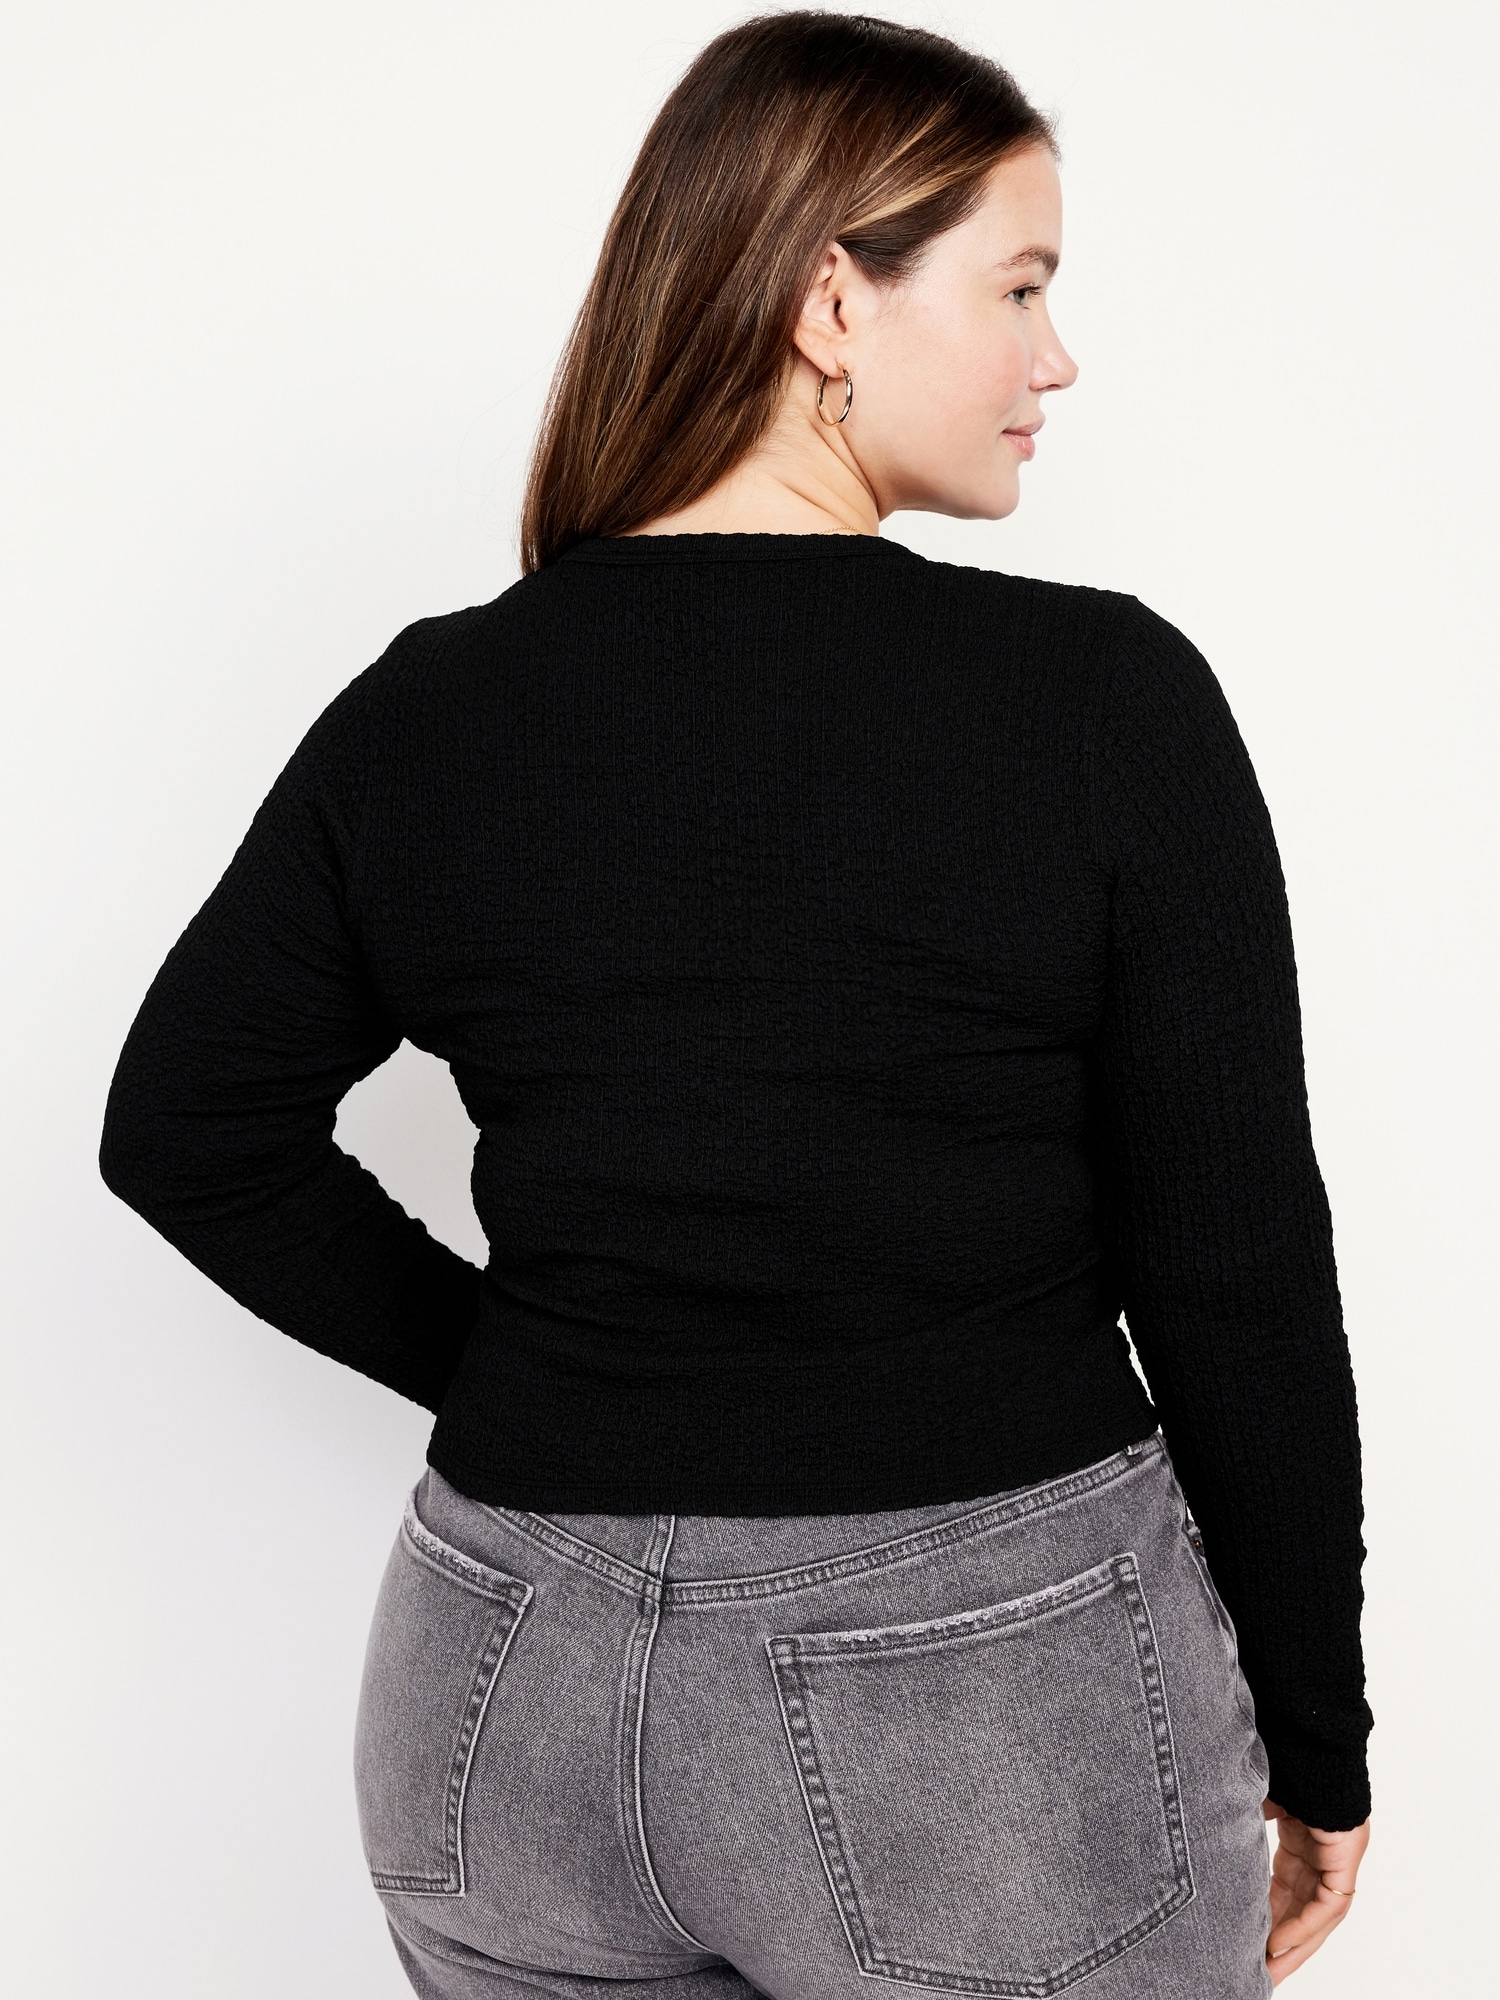 Long-Sleeve Textured Top with Cut-Out Detail, Regular